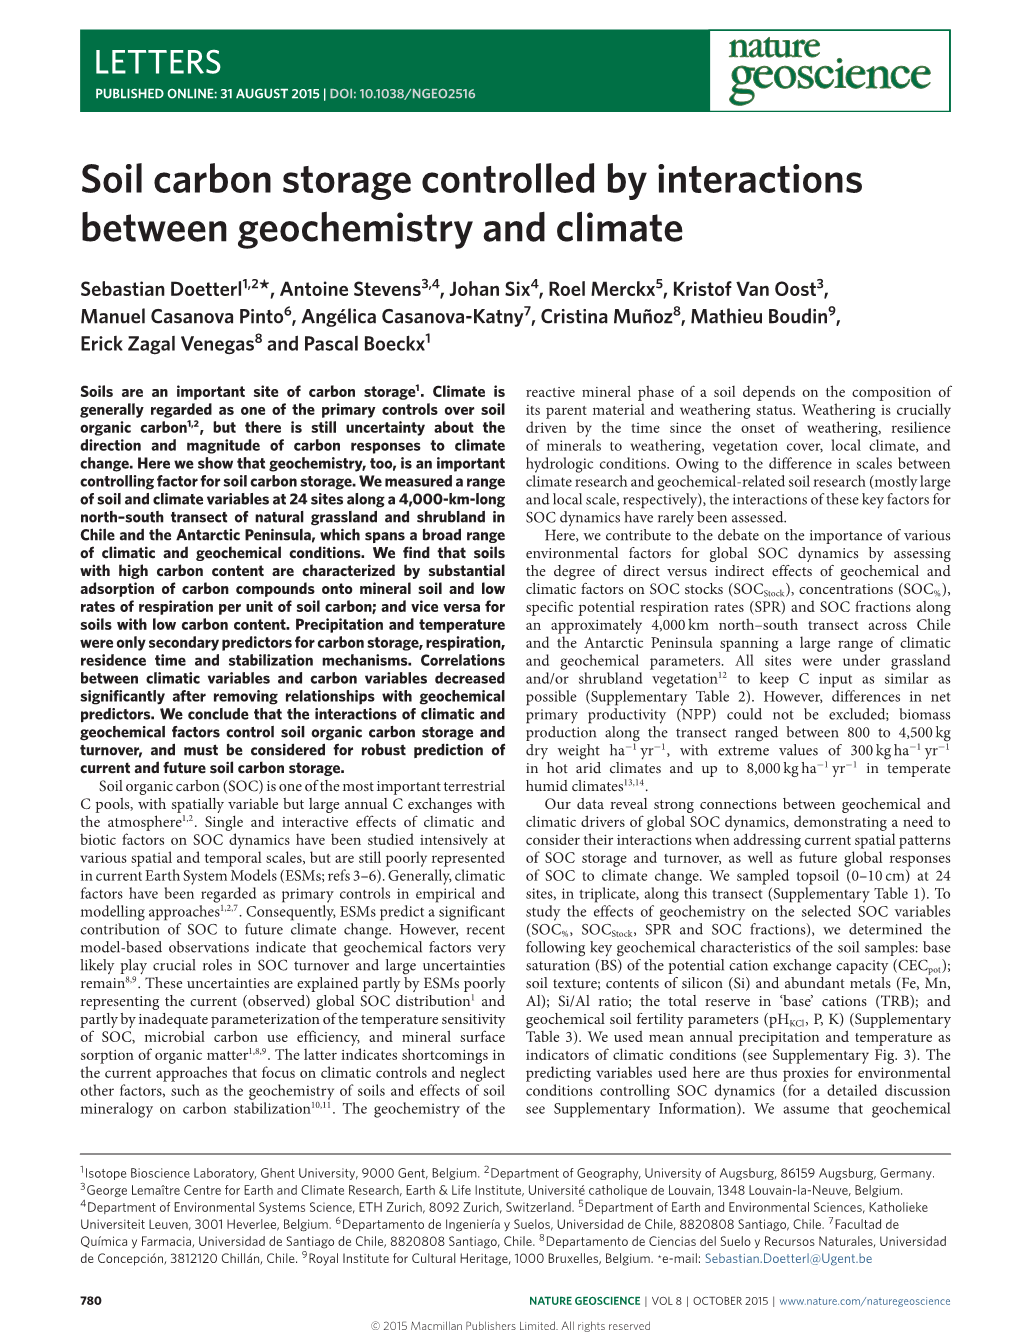 Soil Carbon Storage Controlled by Interactions Between Geochemistry and Climate